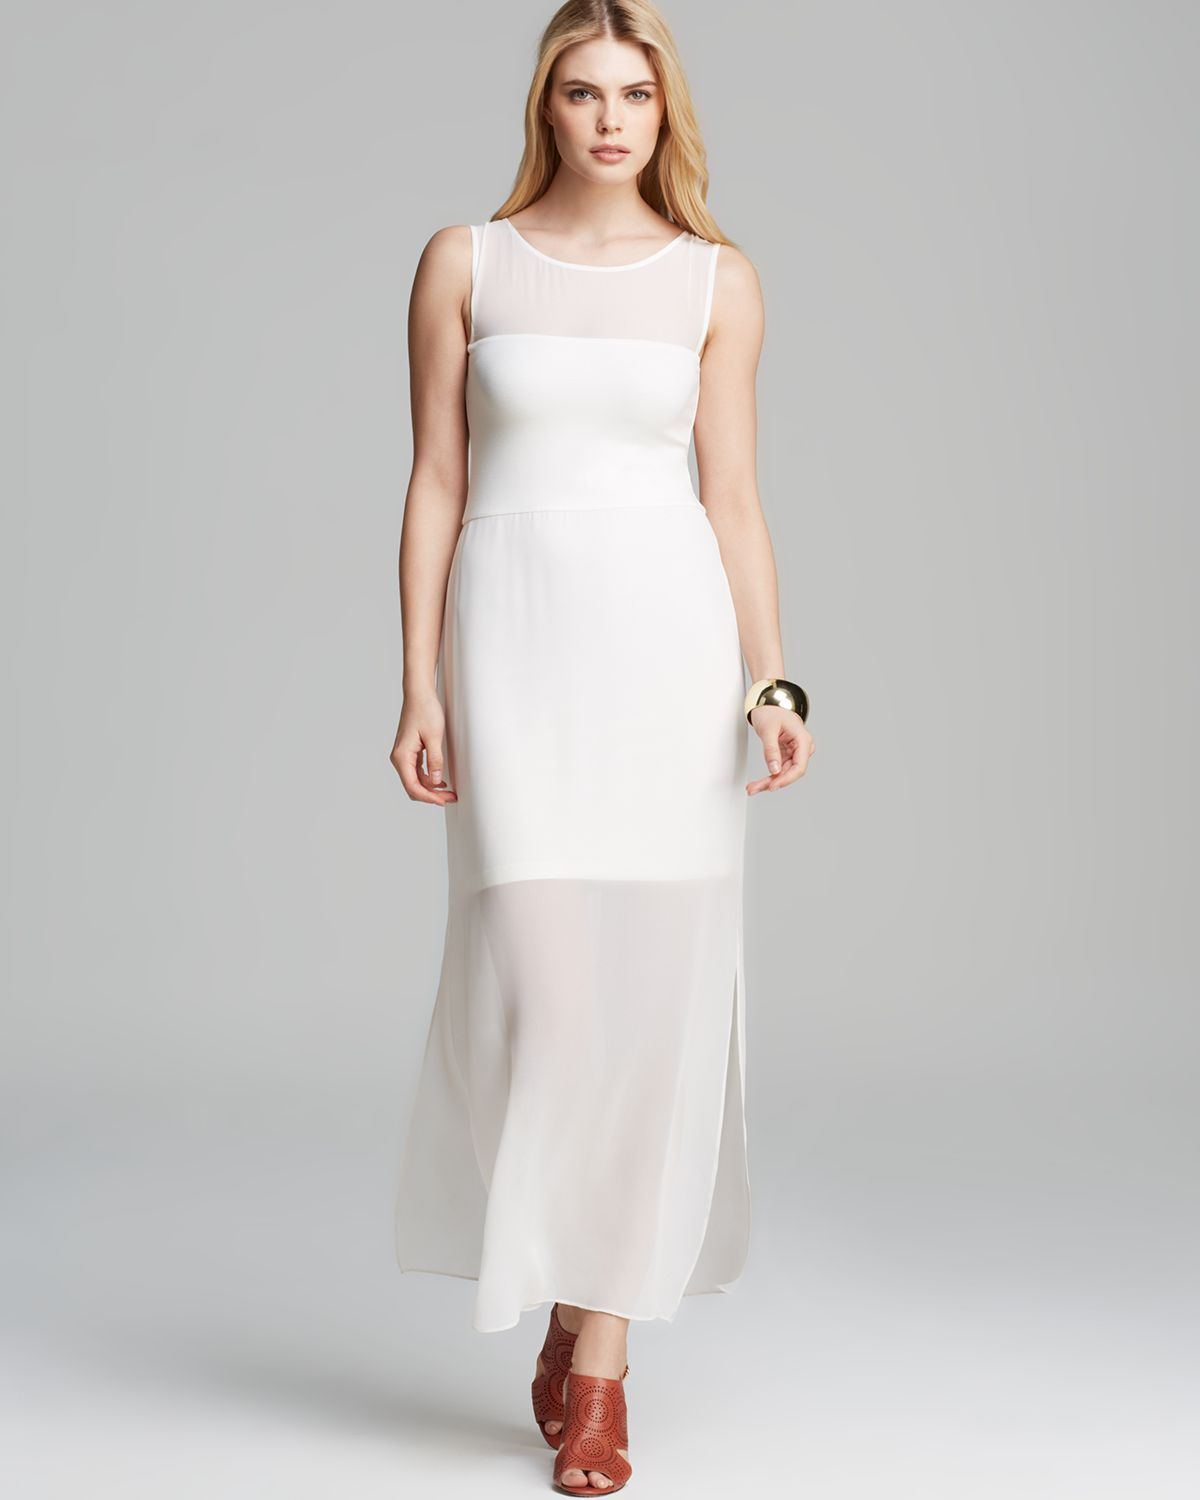 vince camuto white chiffon overlay maxi dress maxi dresses product 1 18351408 0 806315060 normal